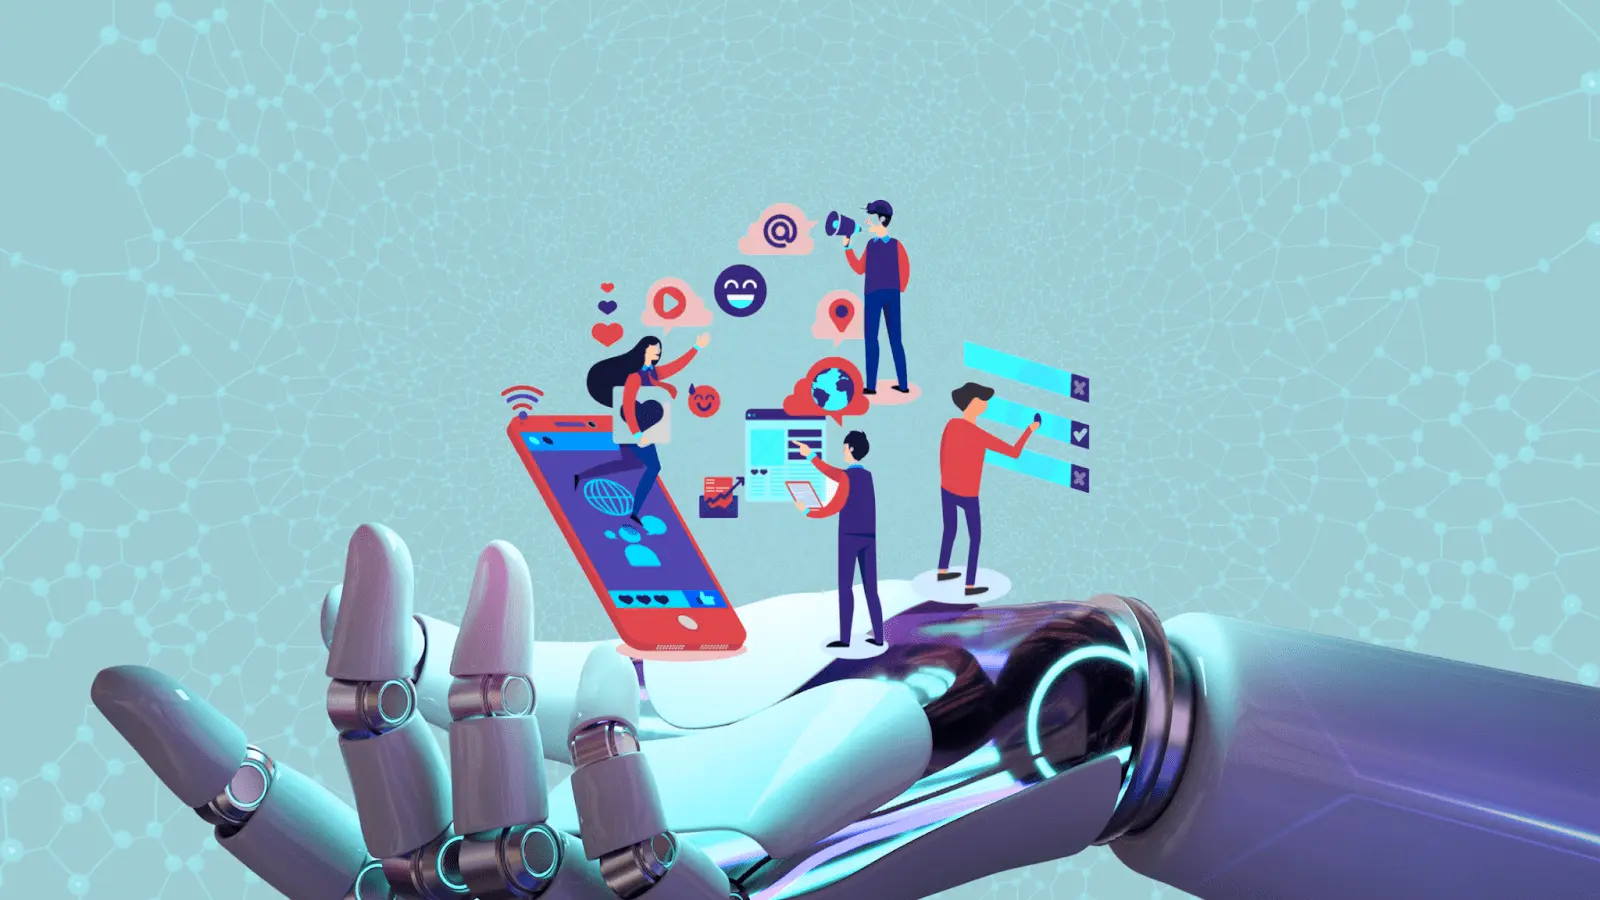 An animated robot hand representing AI holding cartoon images of people engaging with social media and content creation